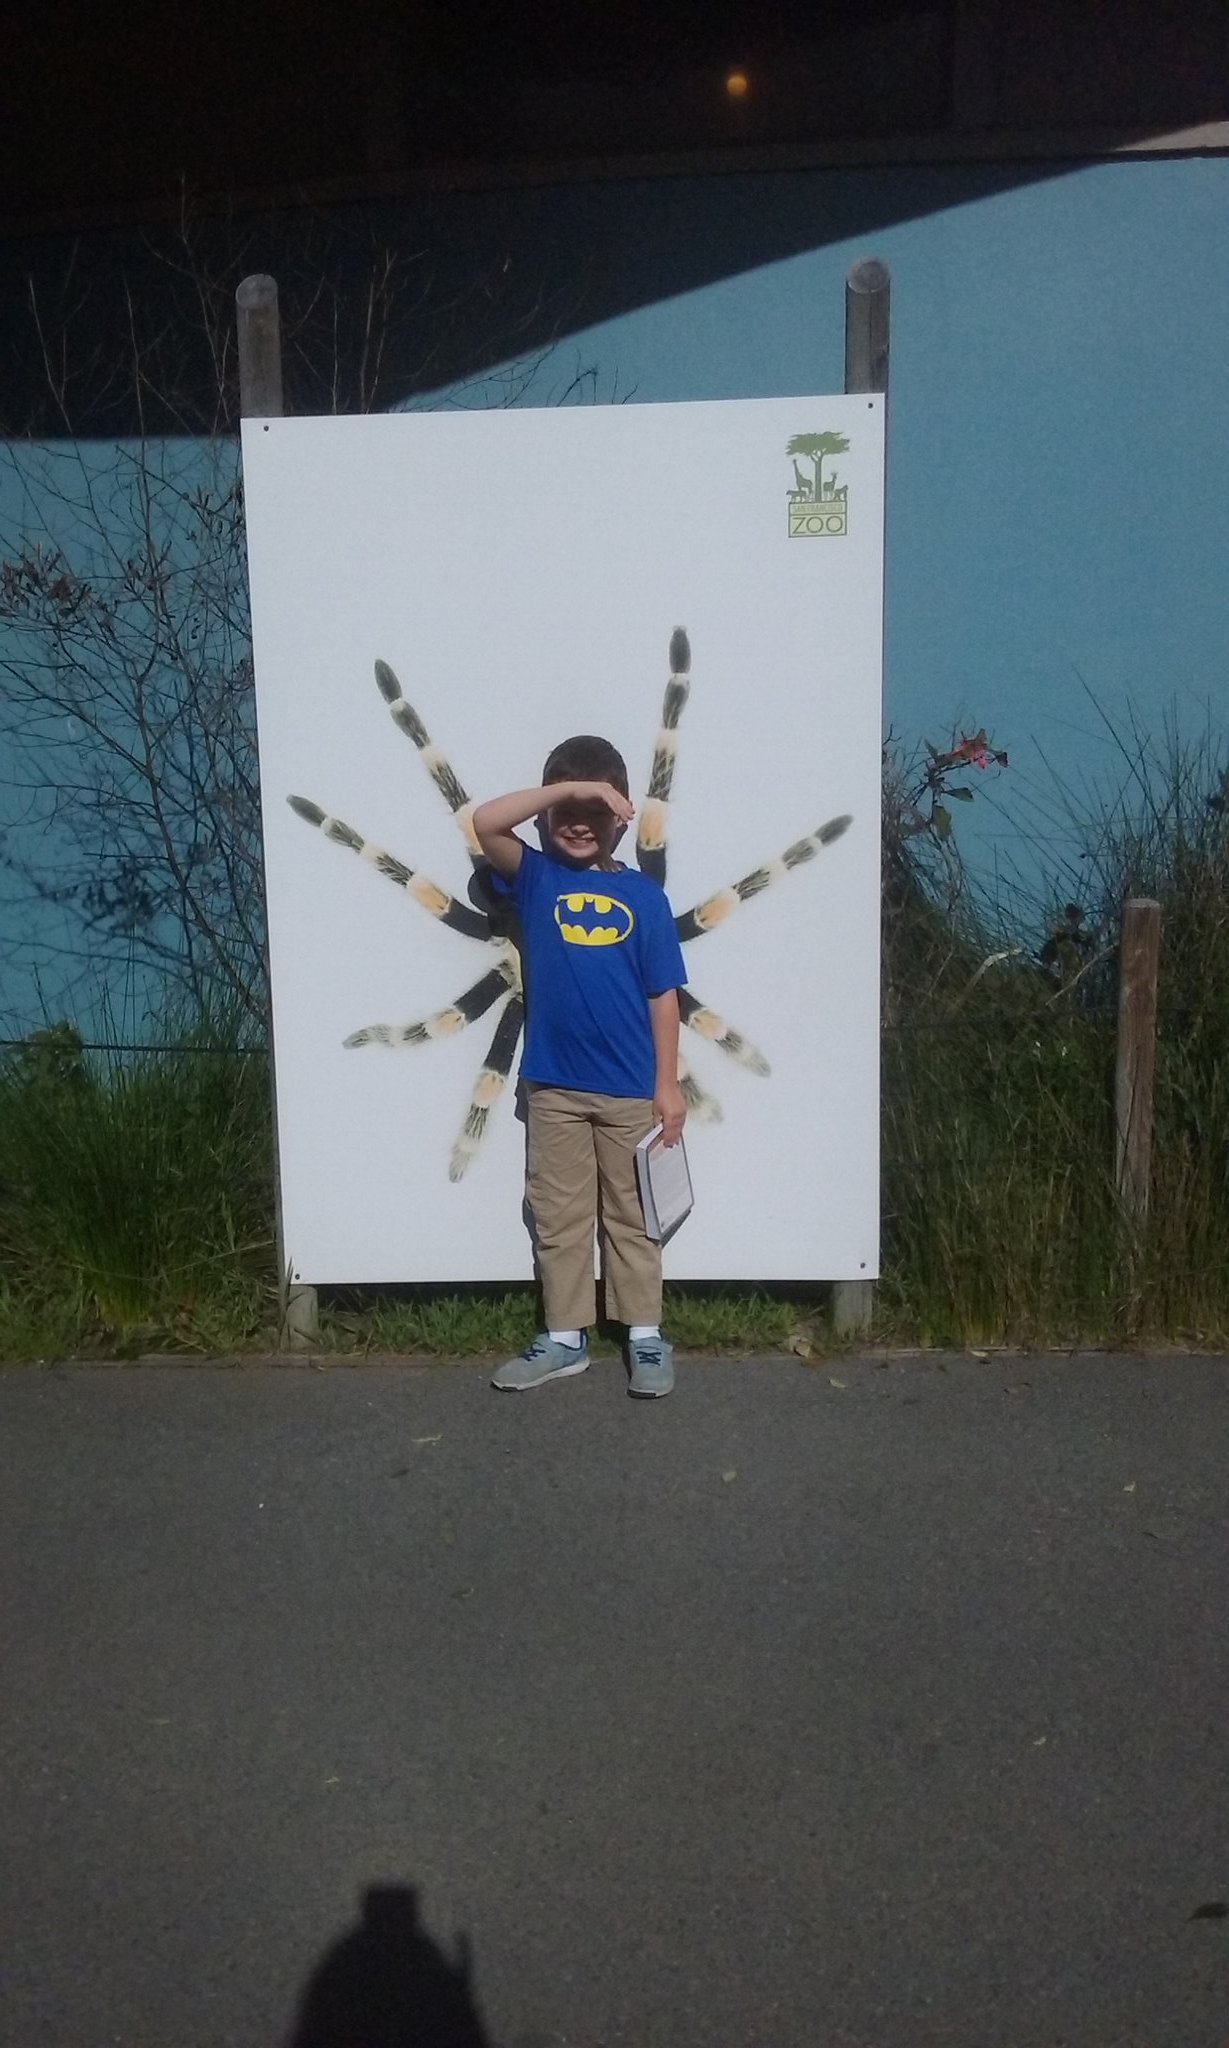 Calvin standing in front of a large spider picture so it looks like he has spider legs coming out of his body.